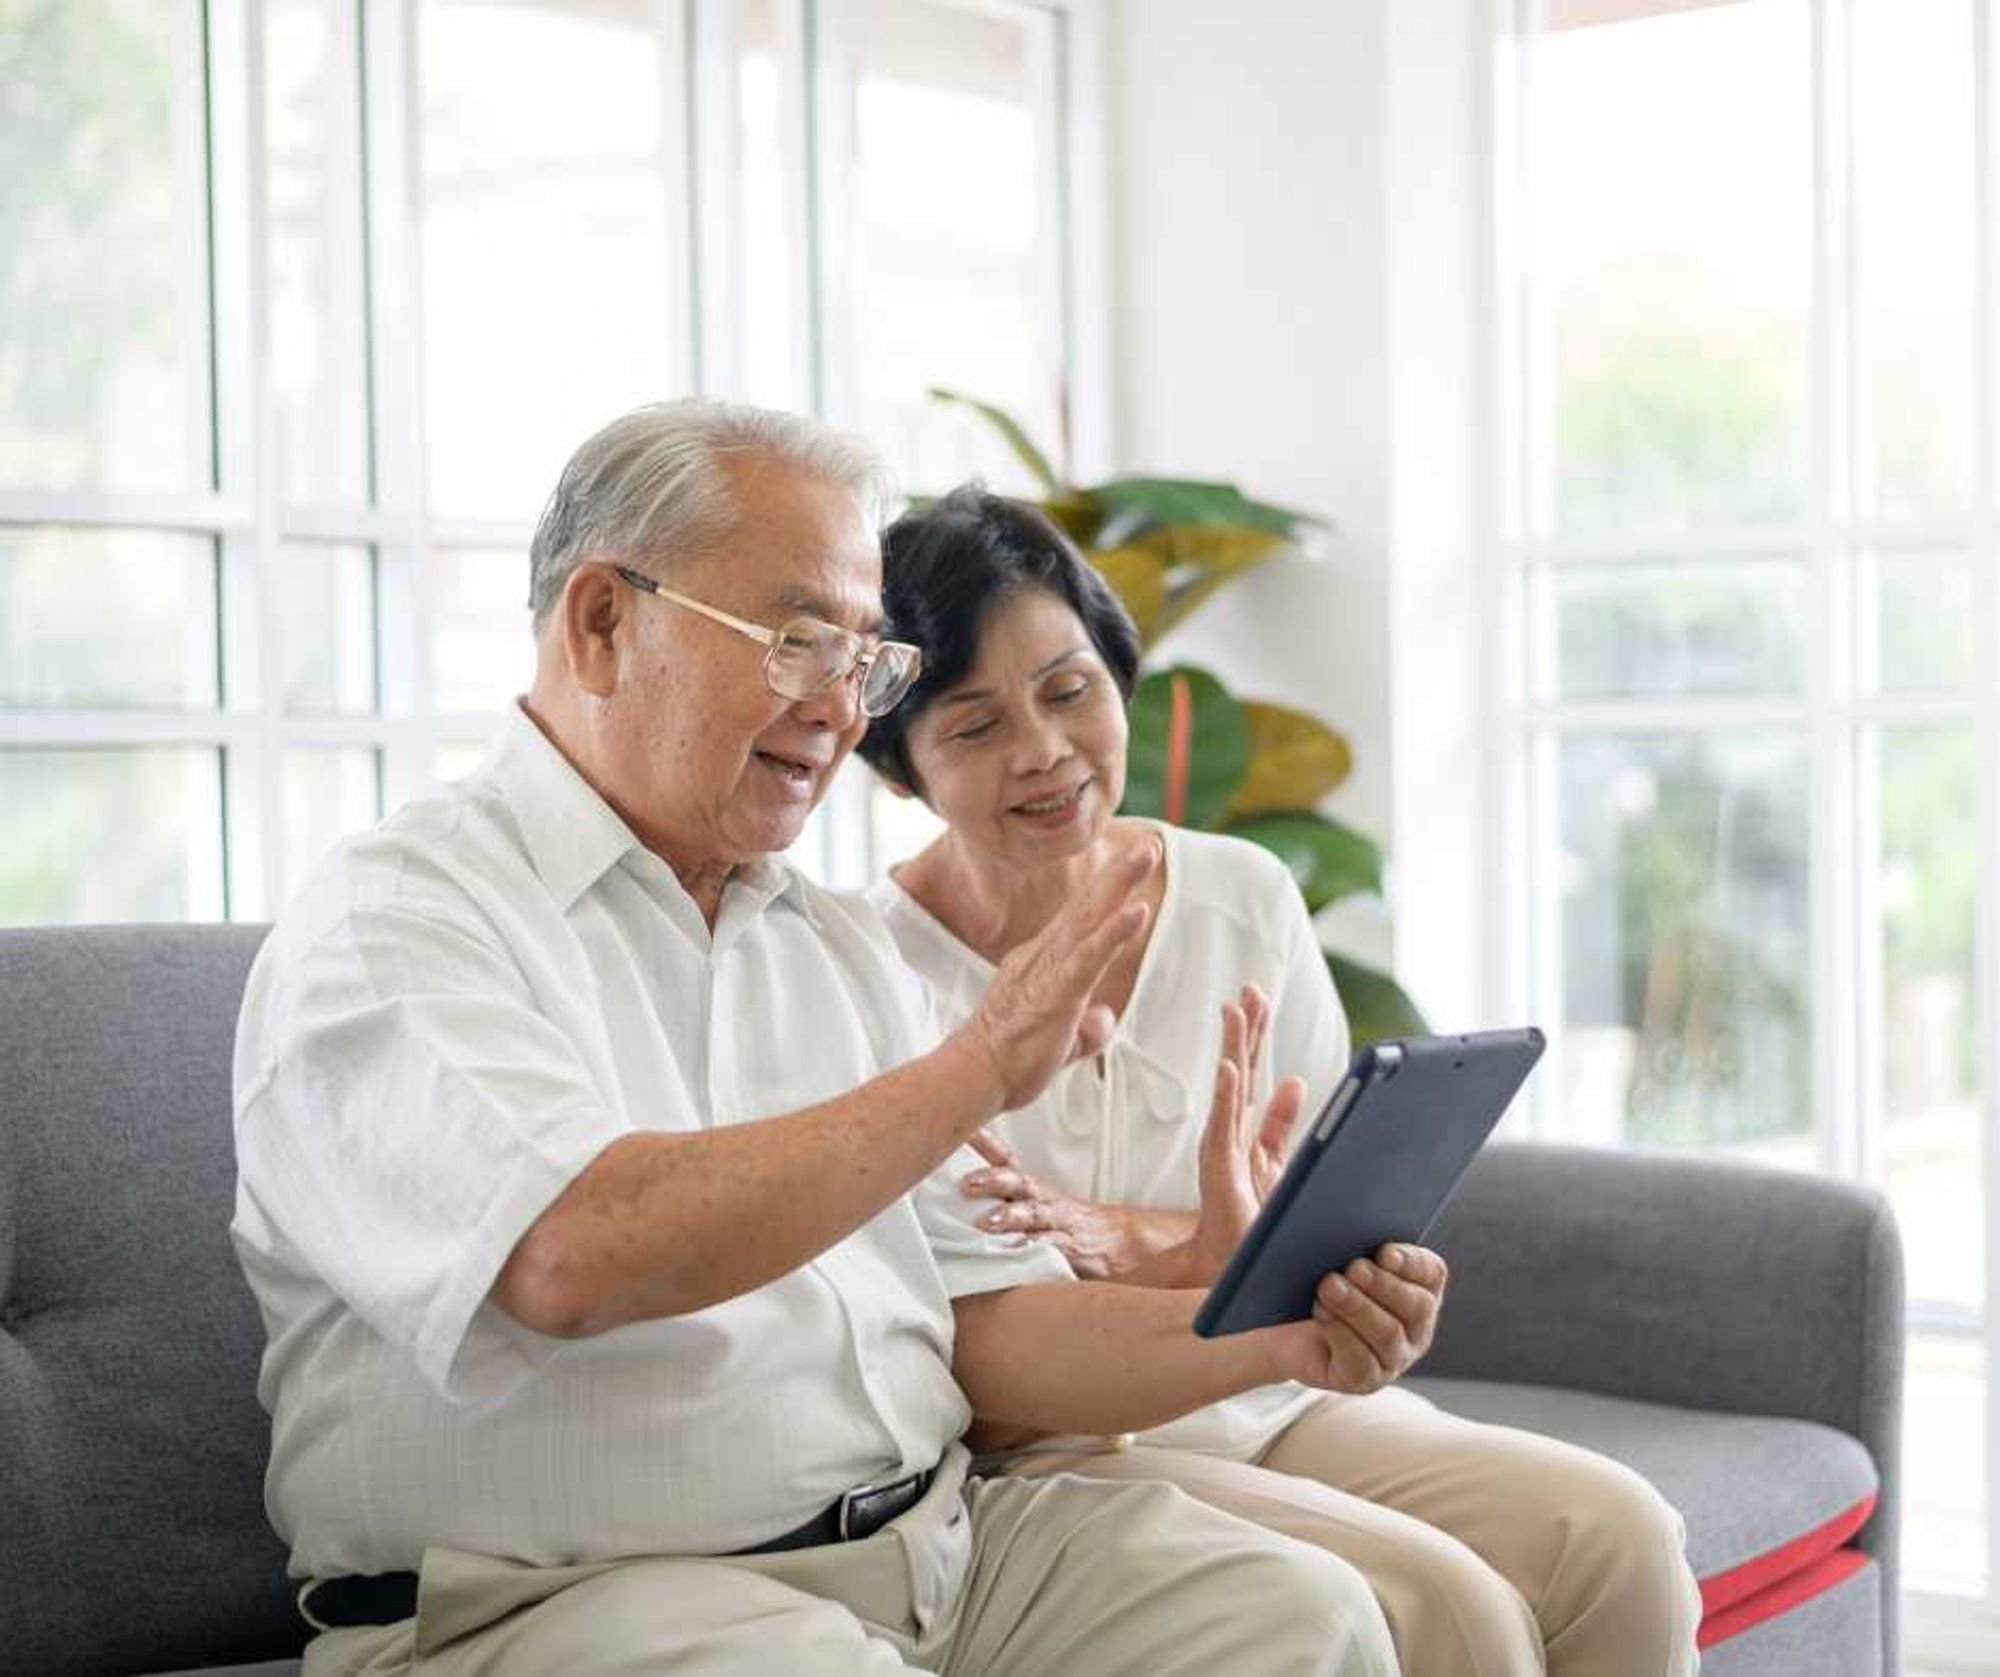 Benefits Of Speech Therapy For Seniors